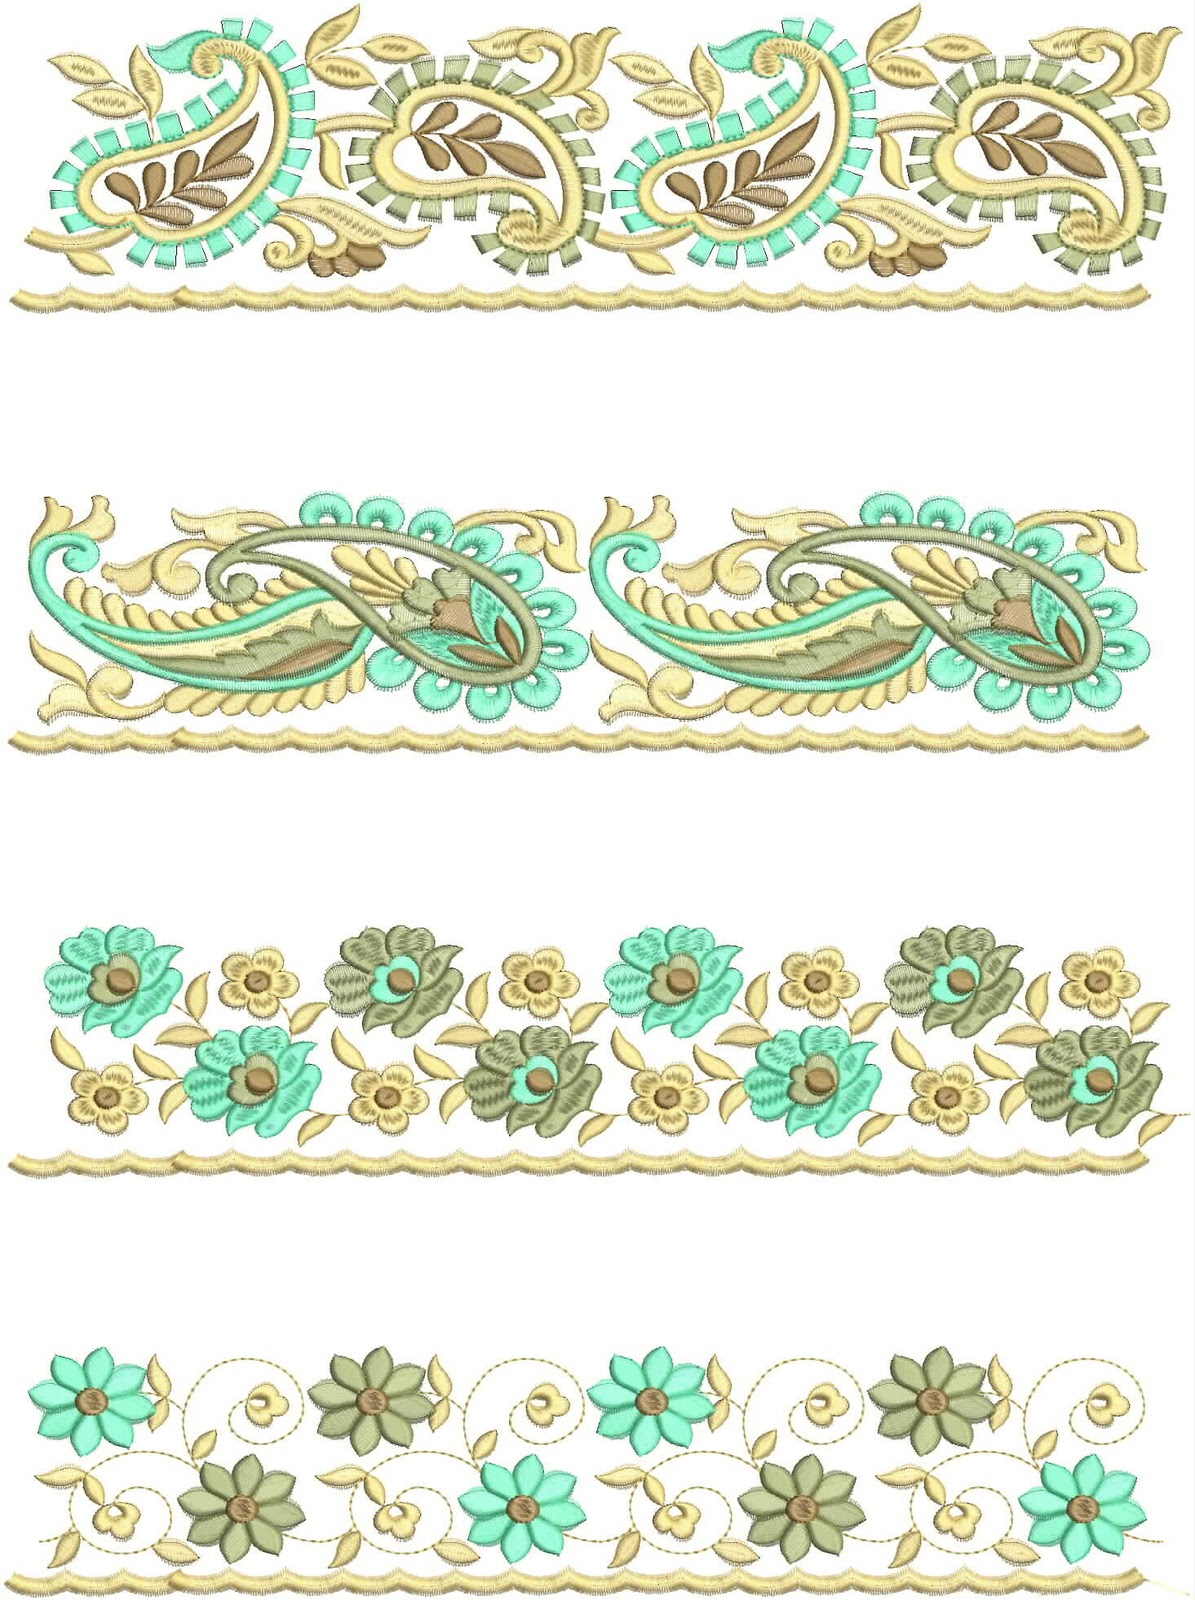 Ribbon Embroidery - Sequin Embroidery, Silk Ribbon Embroidery